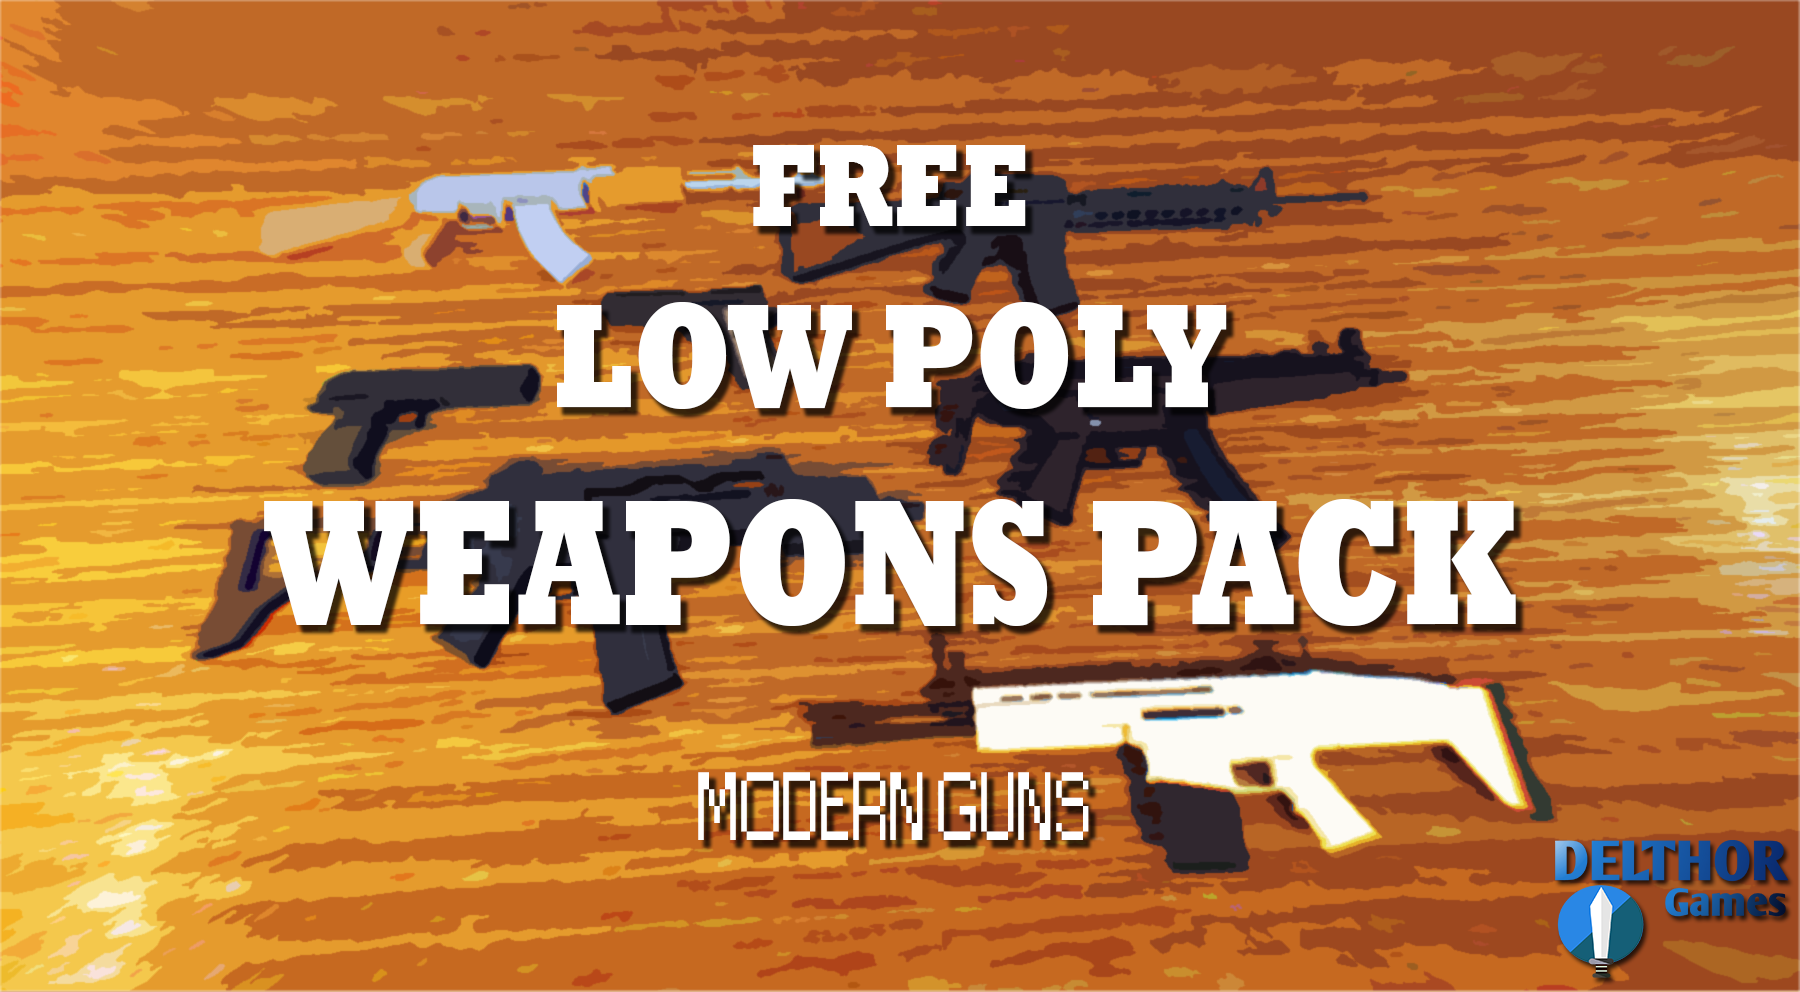 FREE Low Poly Weapons Pack by Delthor Games